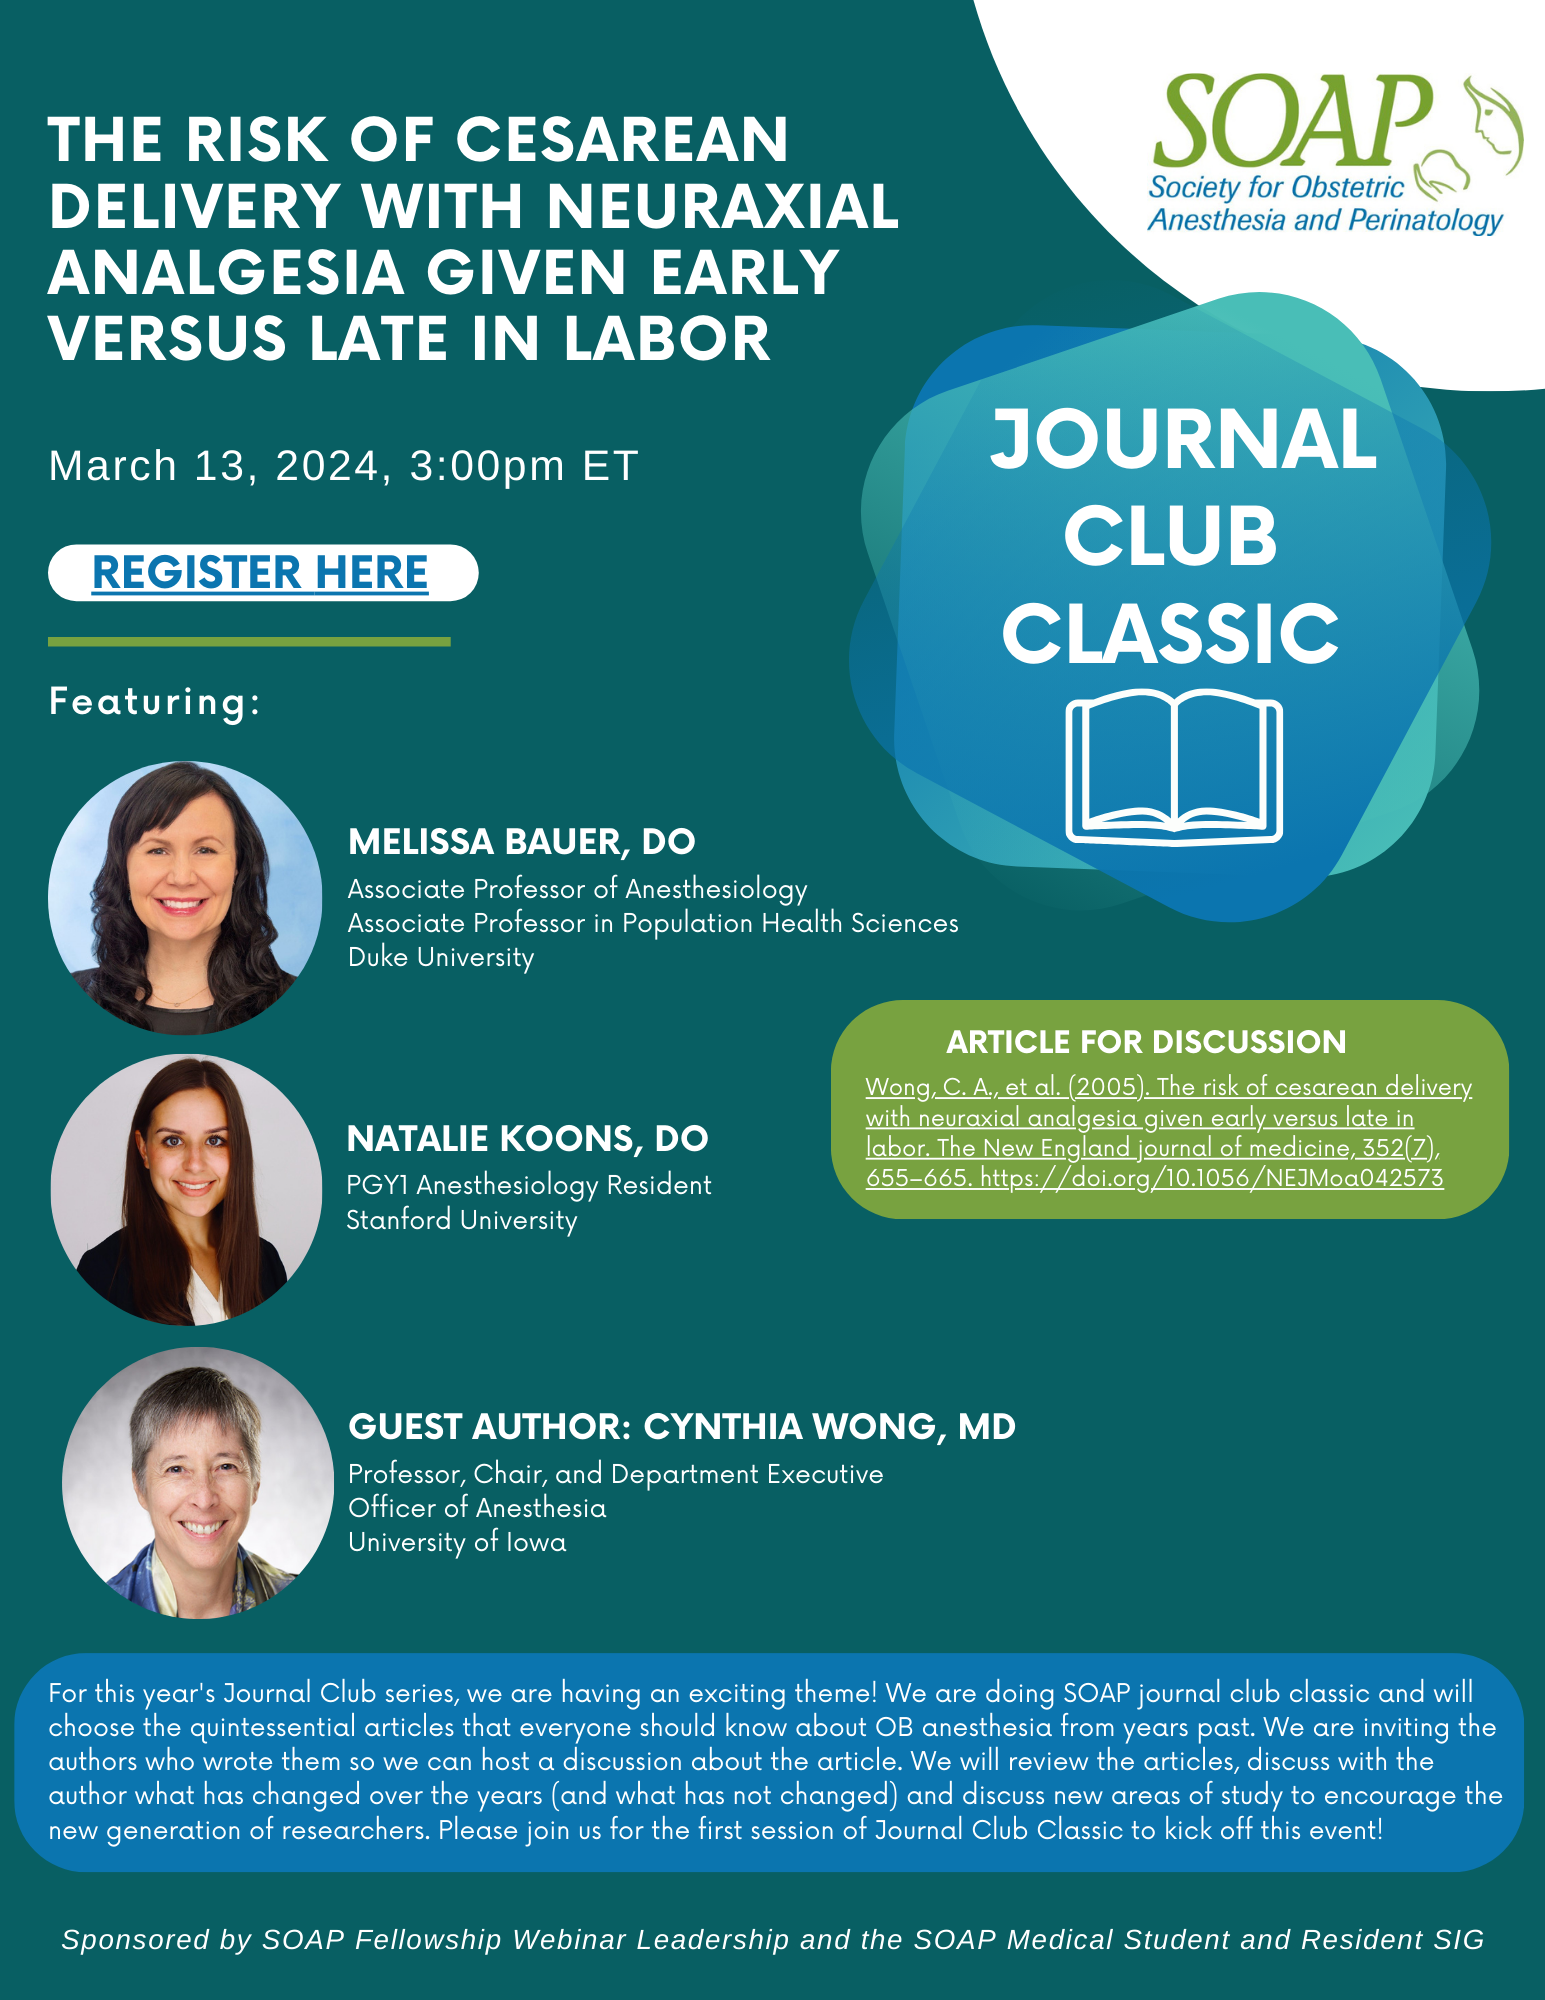 March 2024 Journal Club Classic